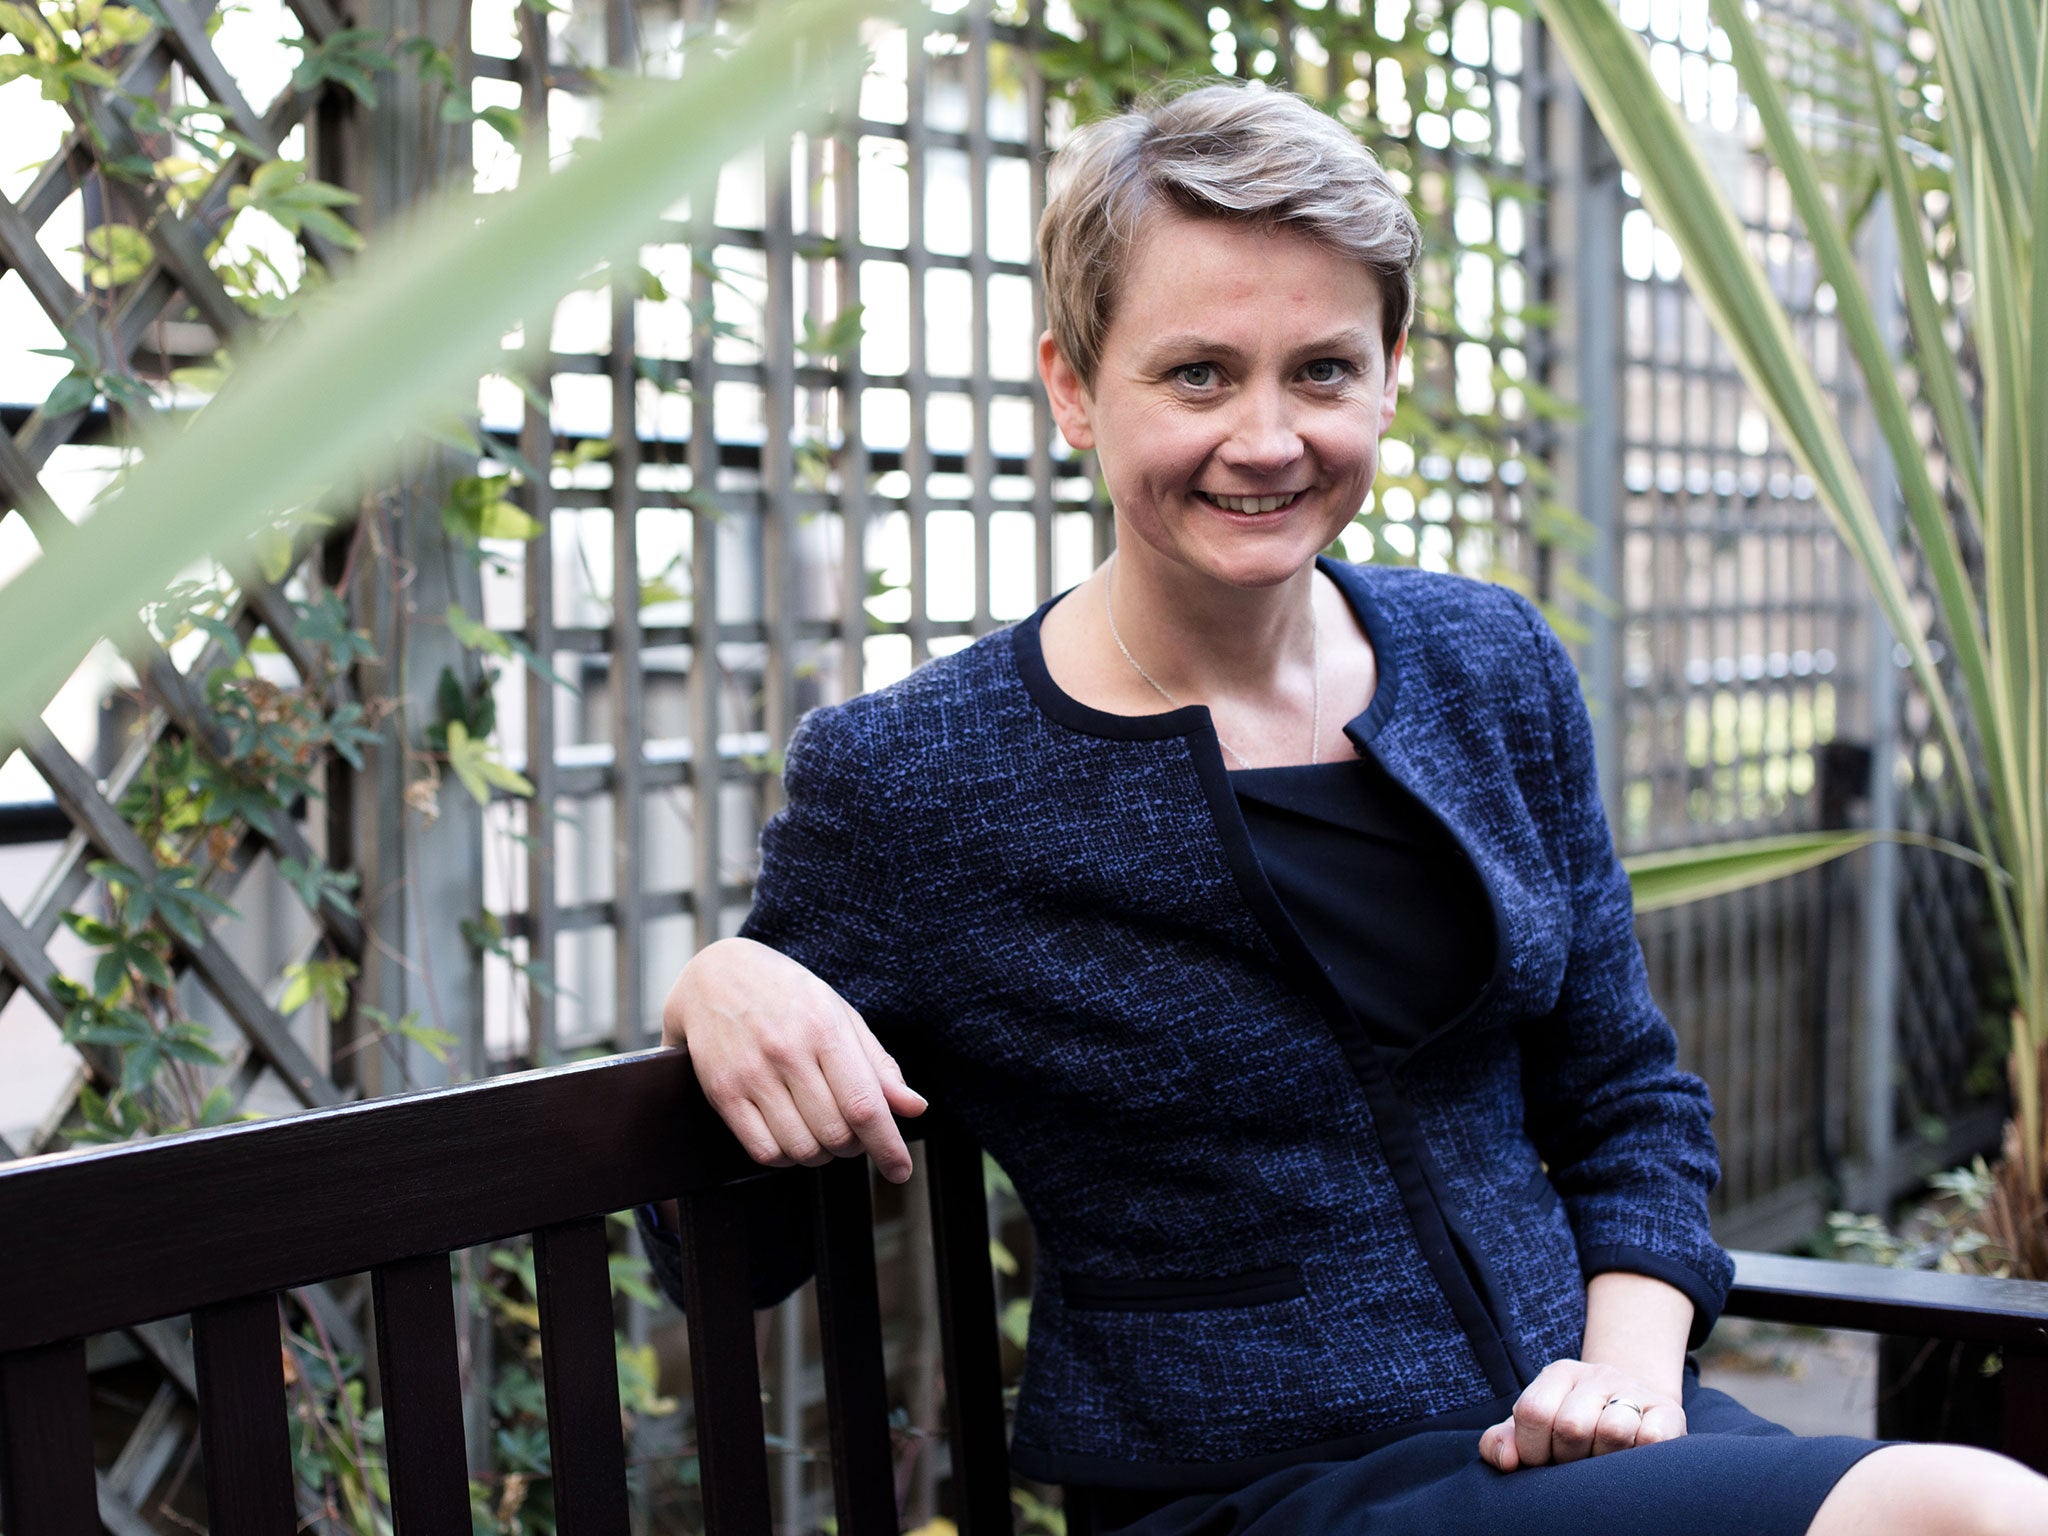 The shadow Home Secretary, Yvette Cooper, said the 41 elected posts would be scrapped and oversight of police forces in England and Wales returned to local communities